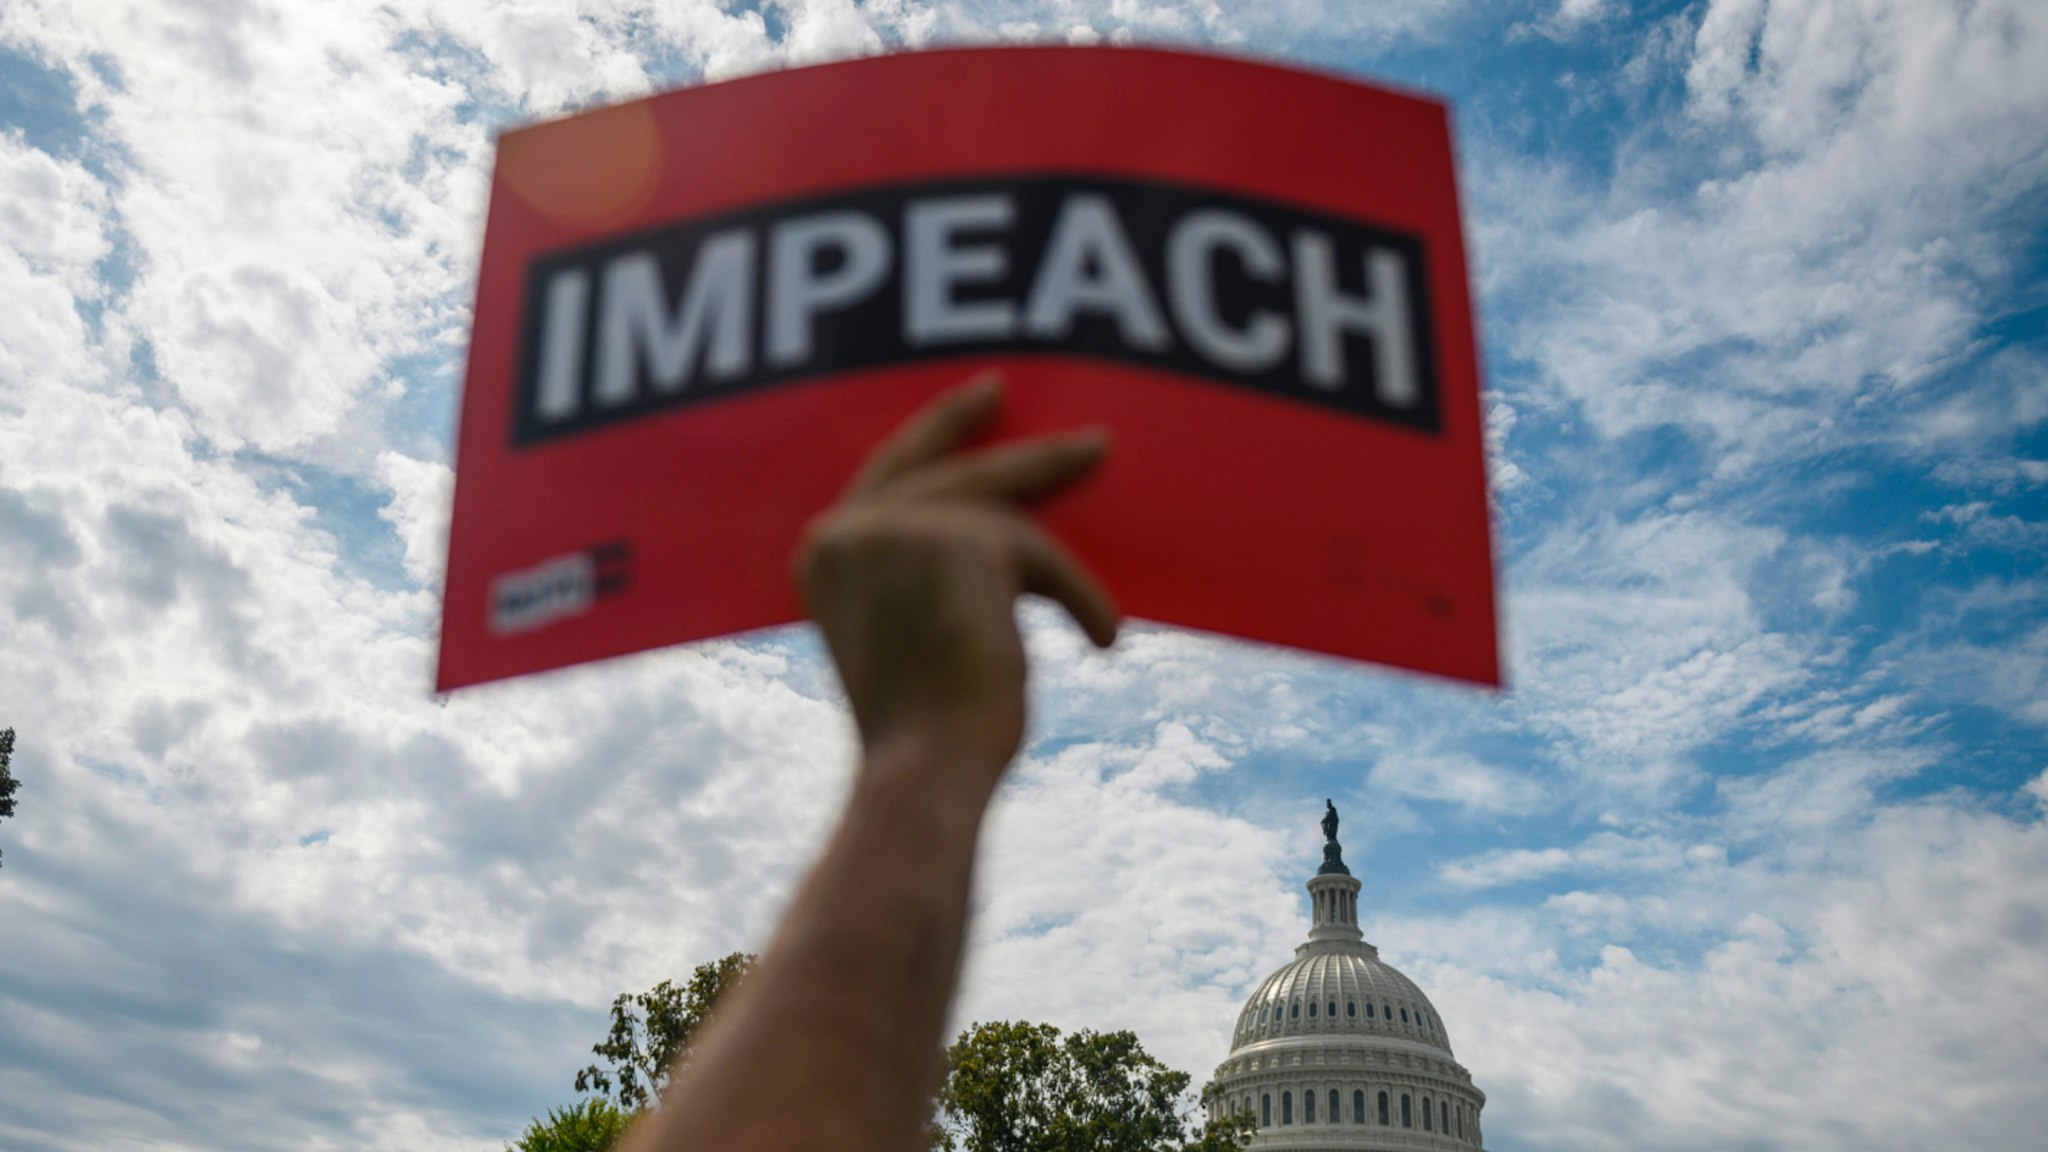 A protester holds up a sign reading "impeach" outside the US Capitol building during the "People's Rally for Impeachment" on Capitol Hill in Washington, DC on September 26, 2019.